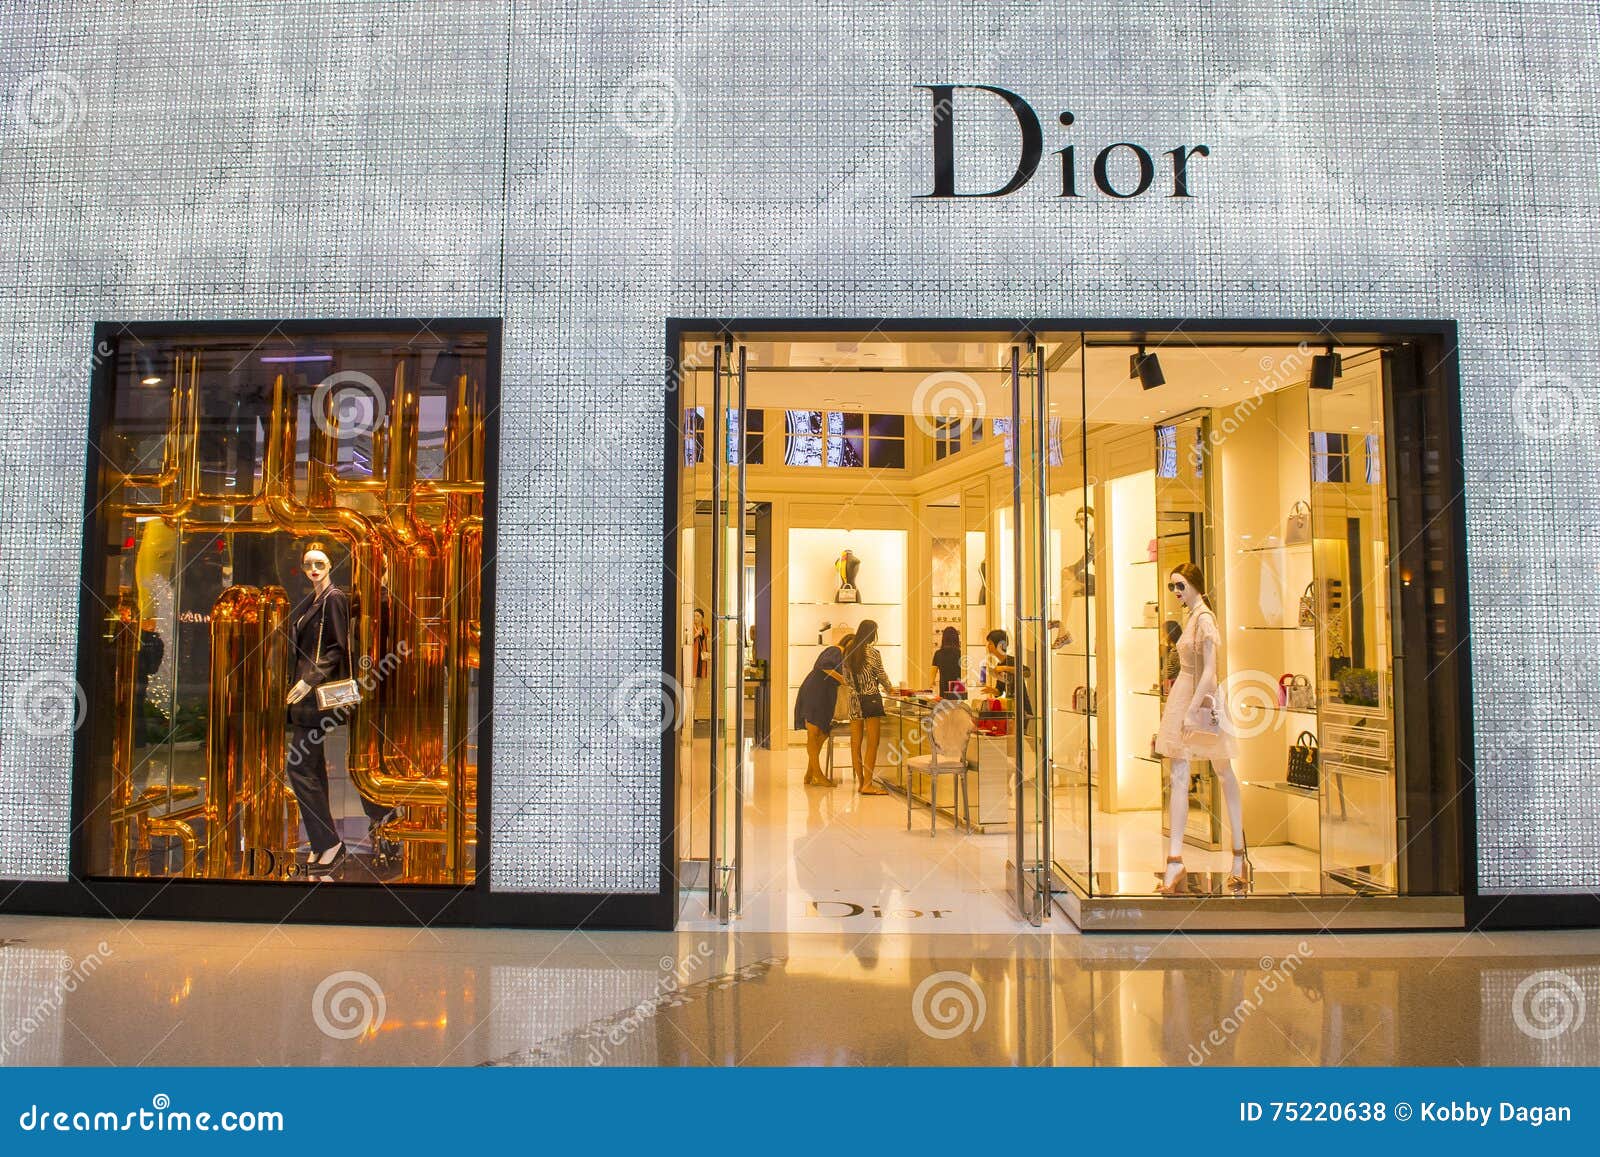 Dior store editorial stock photo. Image of nevada, french - 75220638